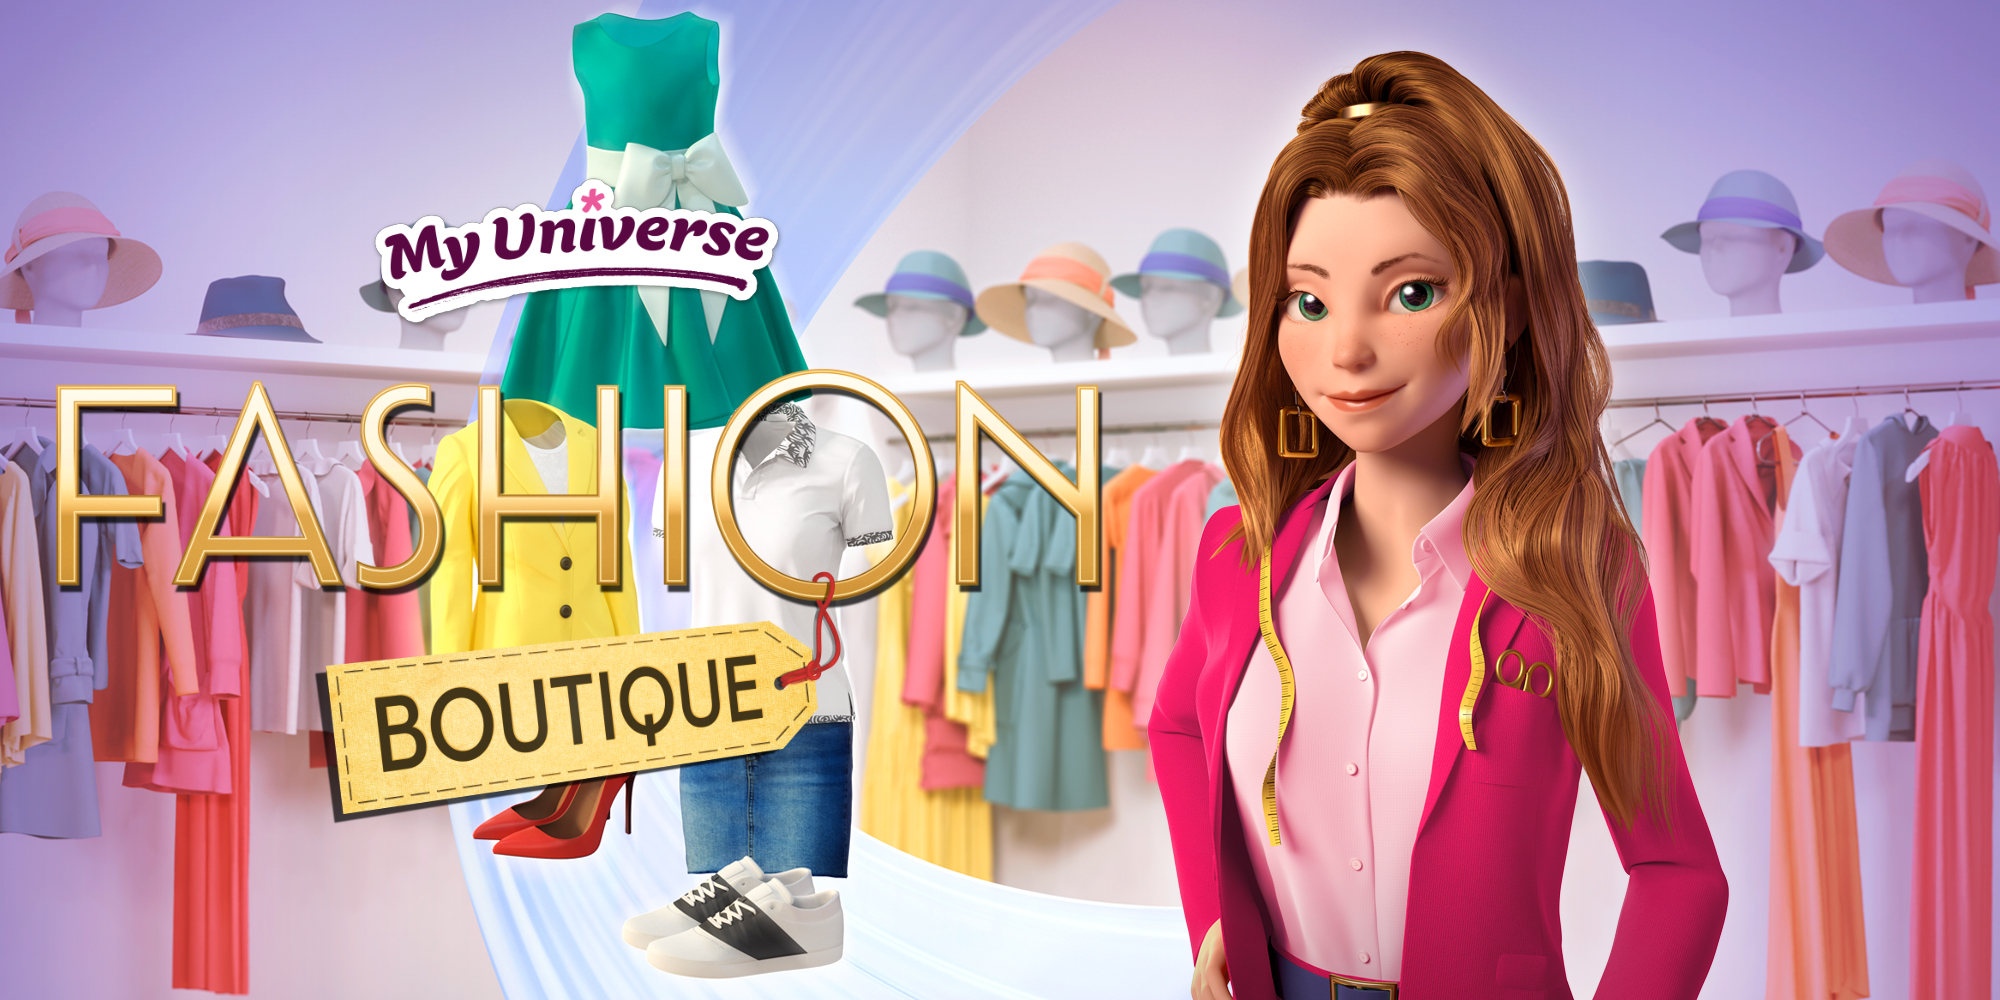 My Universe Top 4 Fashion Video Games - 35 Pouted Lifestyle Magazine